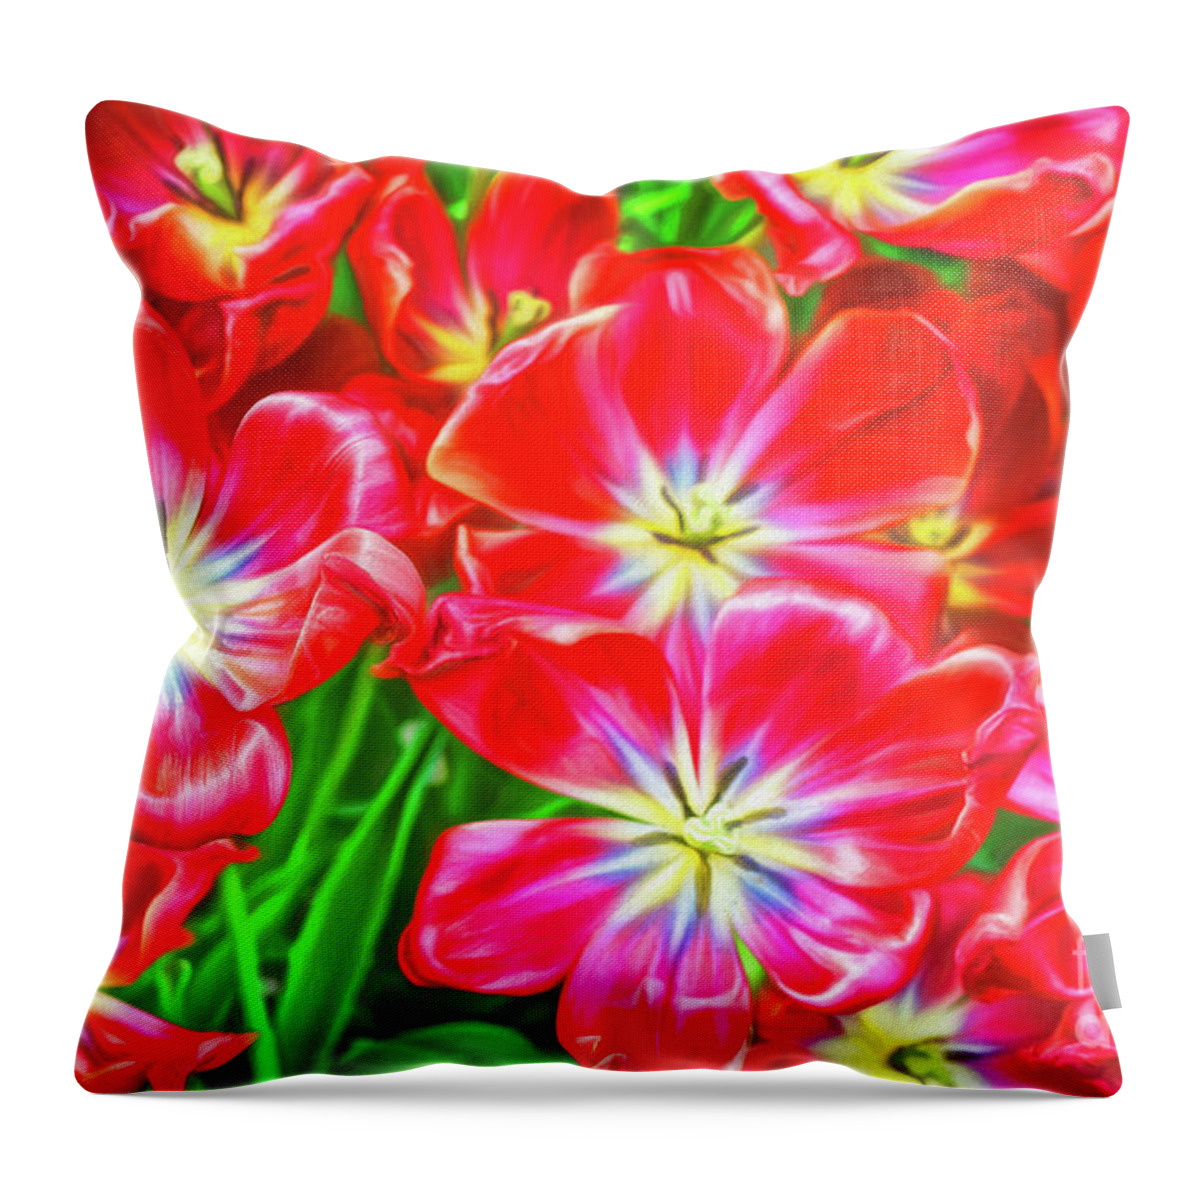 Tulips Throw Pillow featuring the photograph A Sea of Brilliant Red Tulips by Sue Melvin